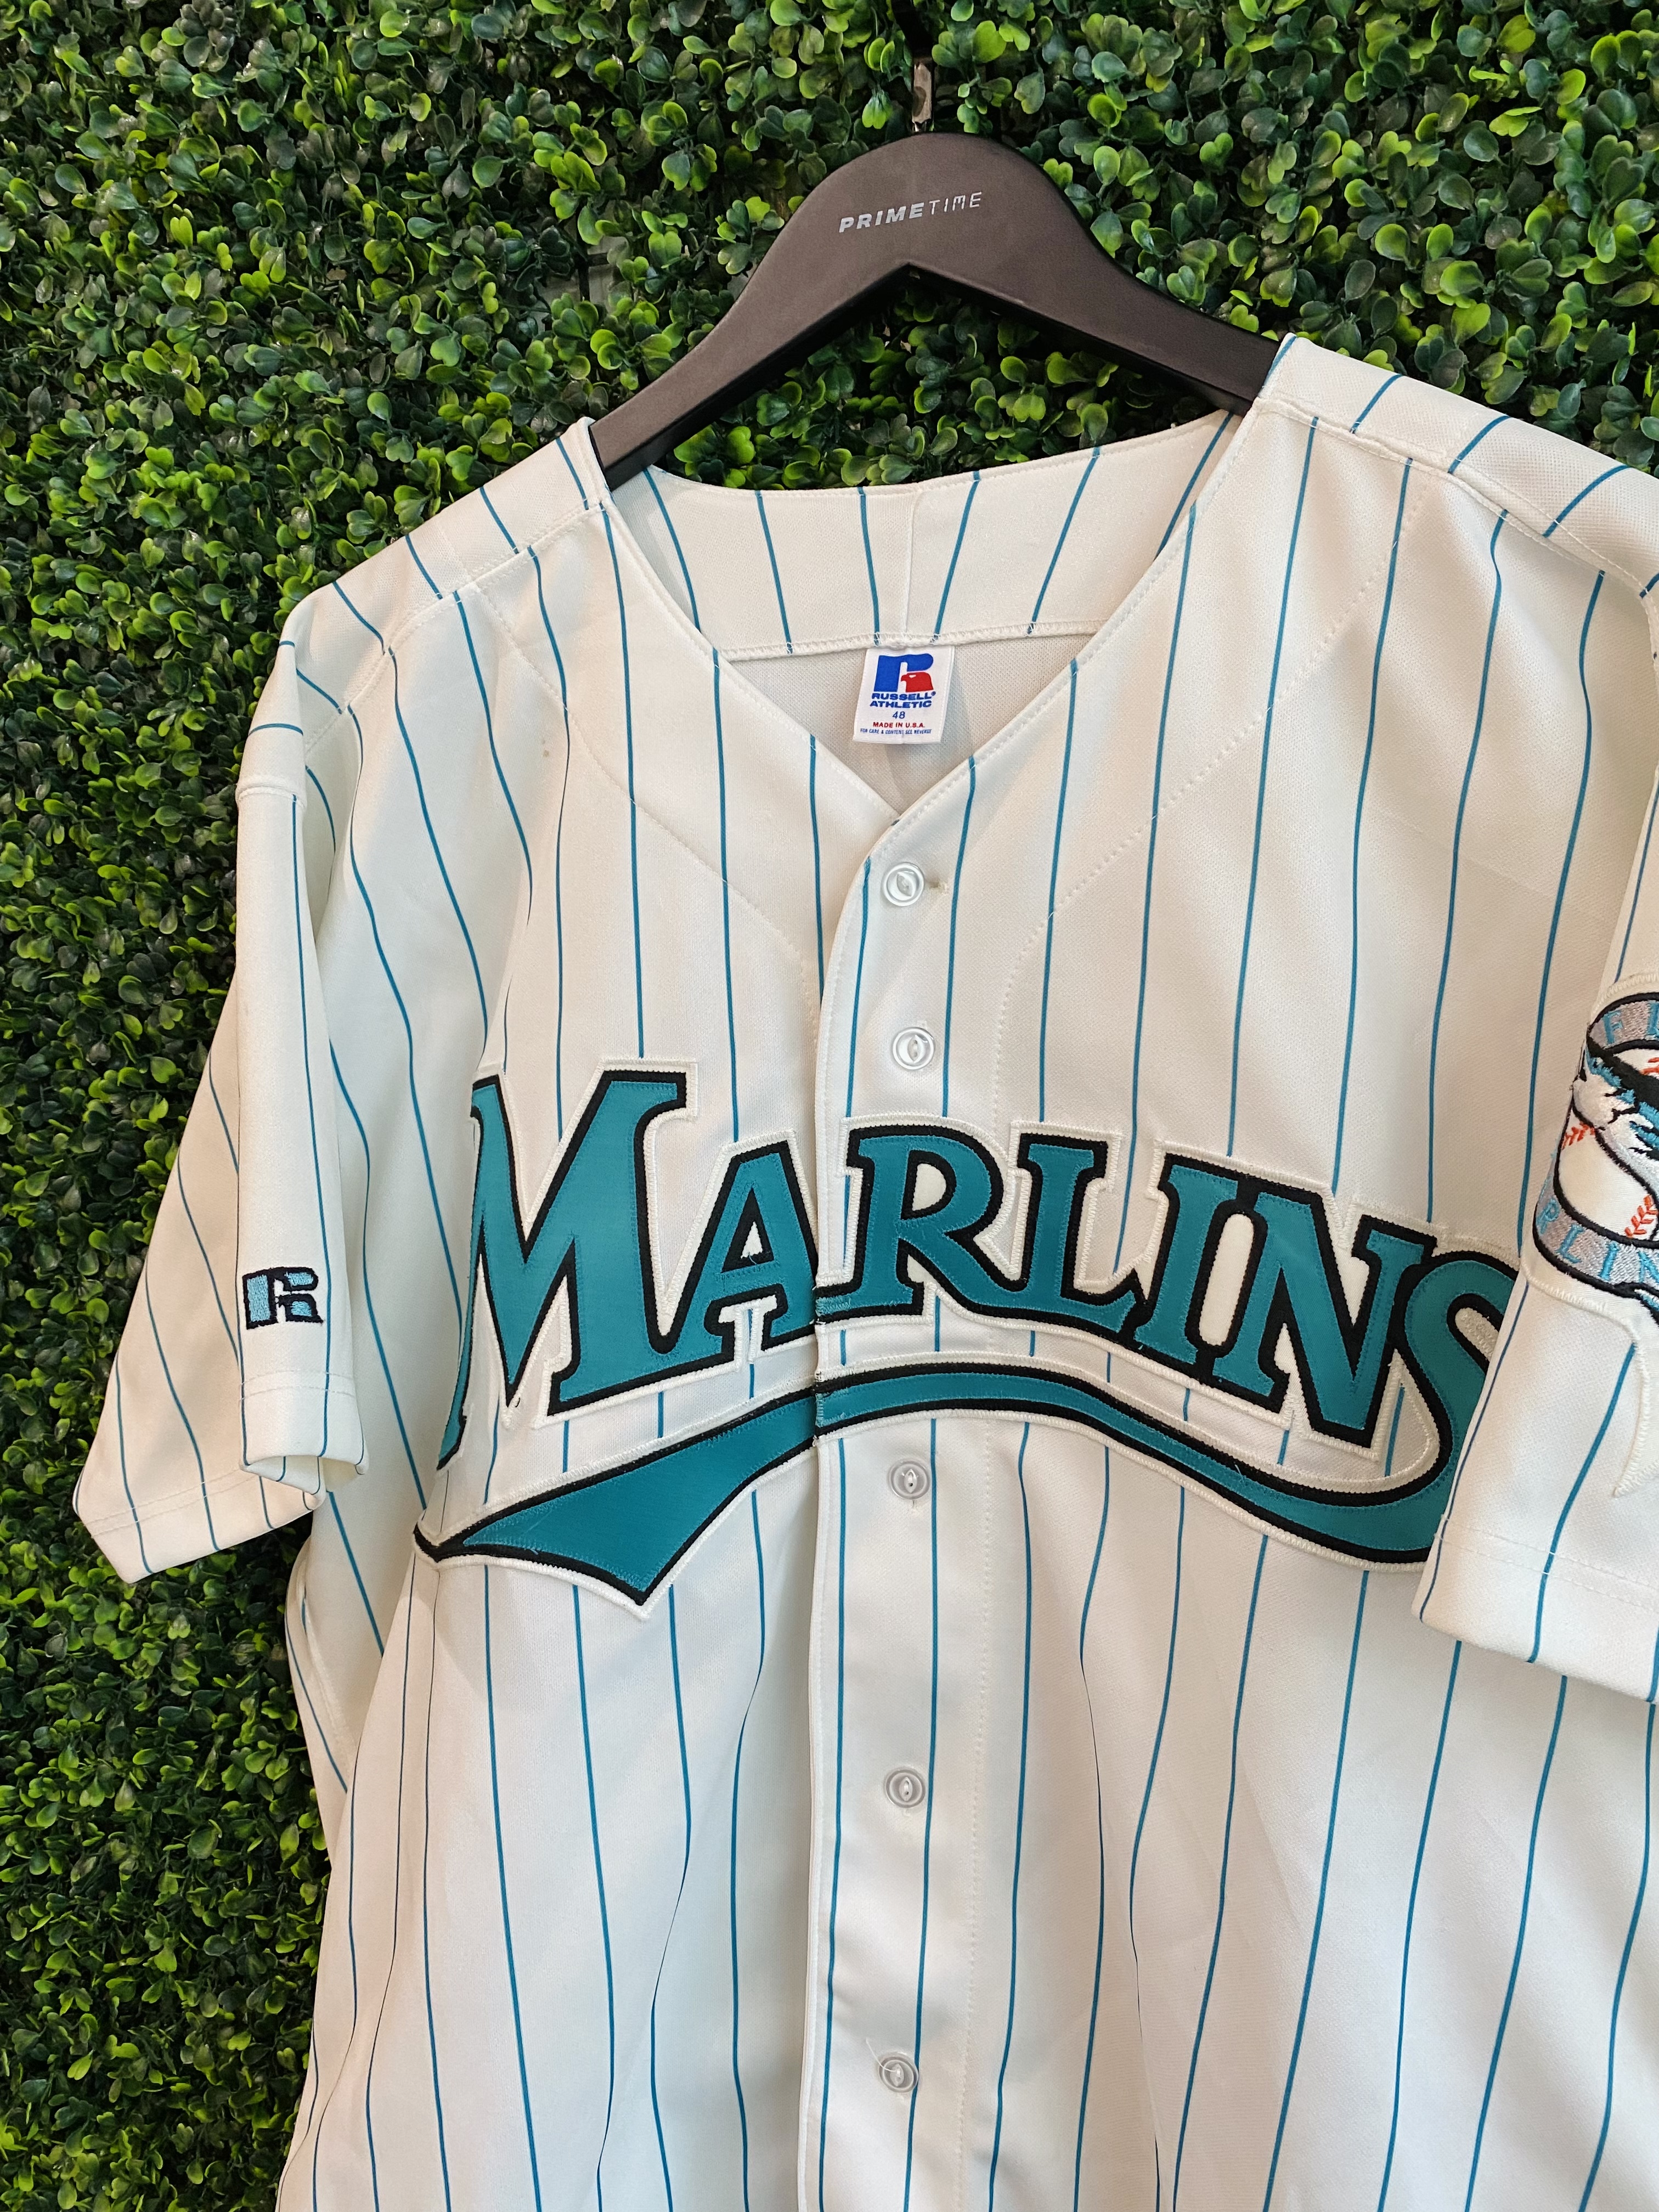 BNWOT Vintage 90s Florida Marlins Authentic russell athletic jersey MLB